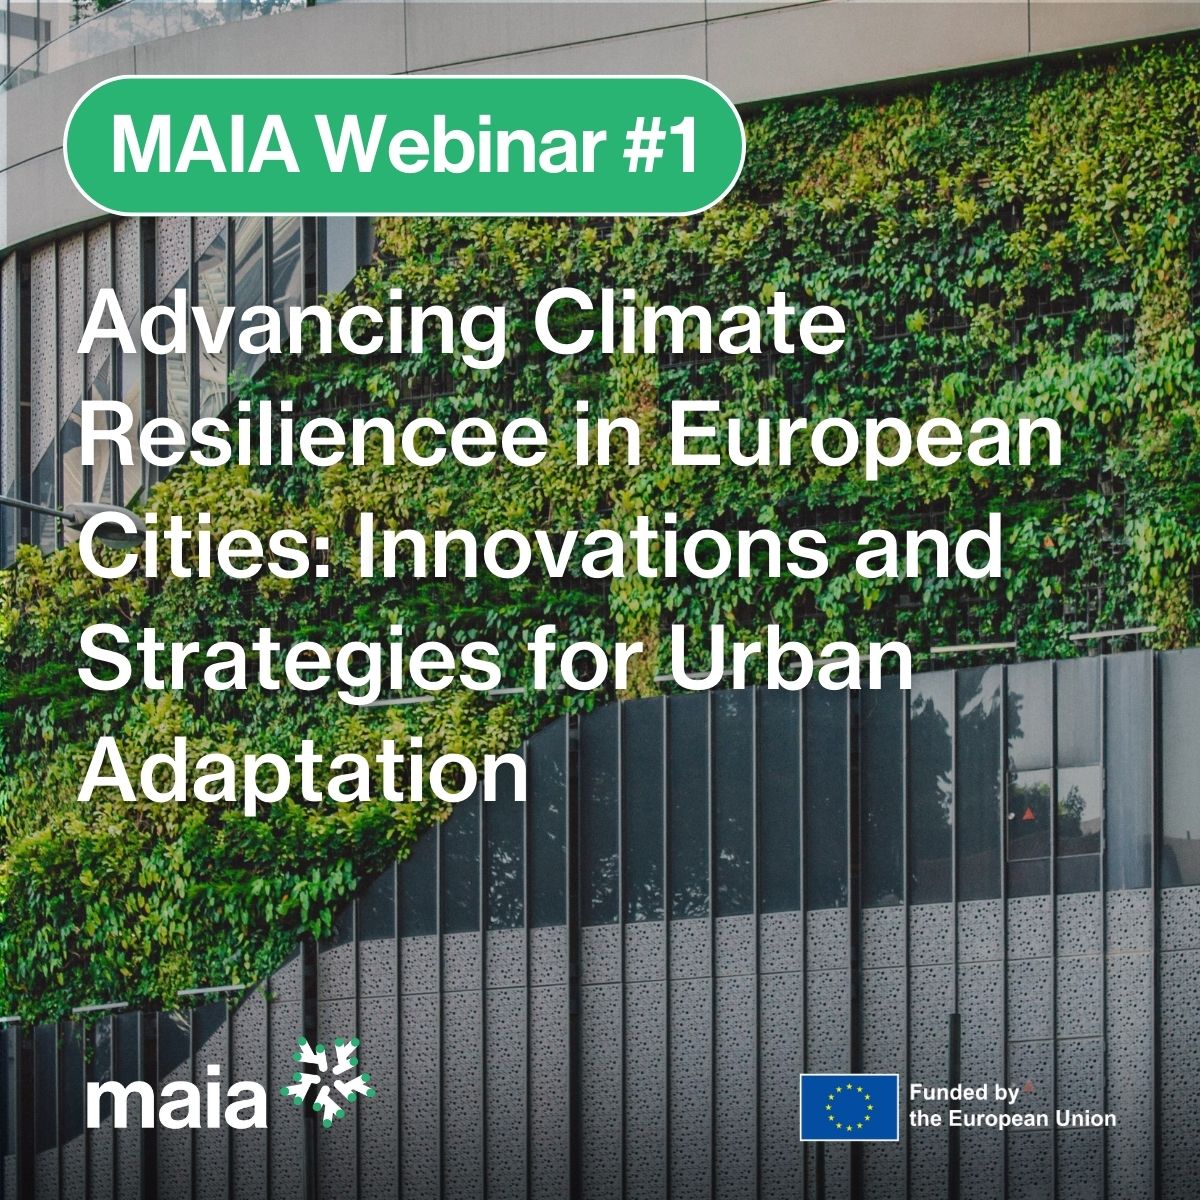 MAIA Webinar Series. Advancing Climate Resilience in European Cities: Innovations and Strategies for Urban Adaptation